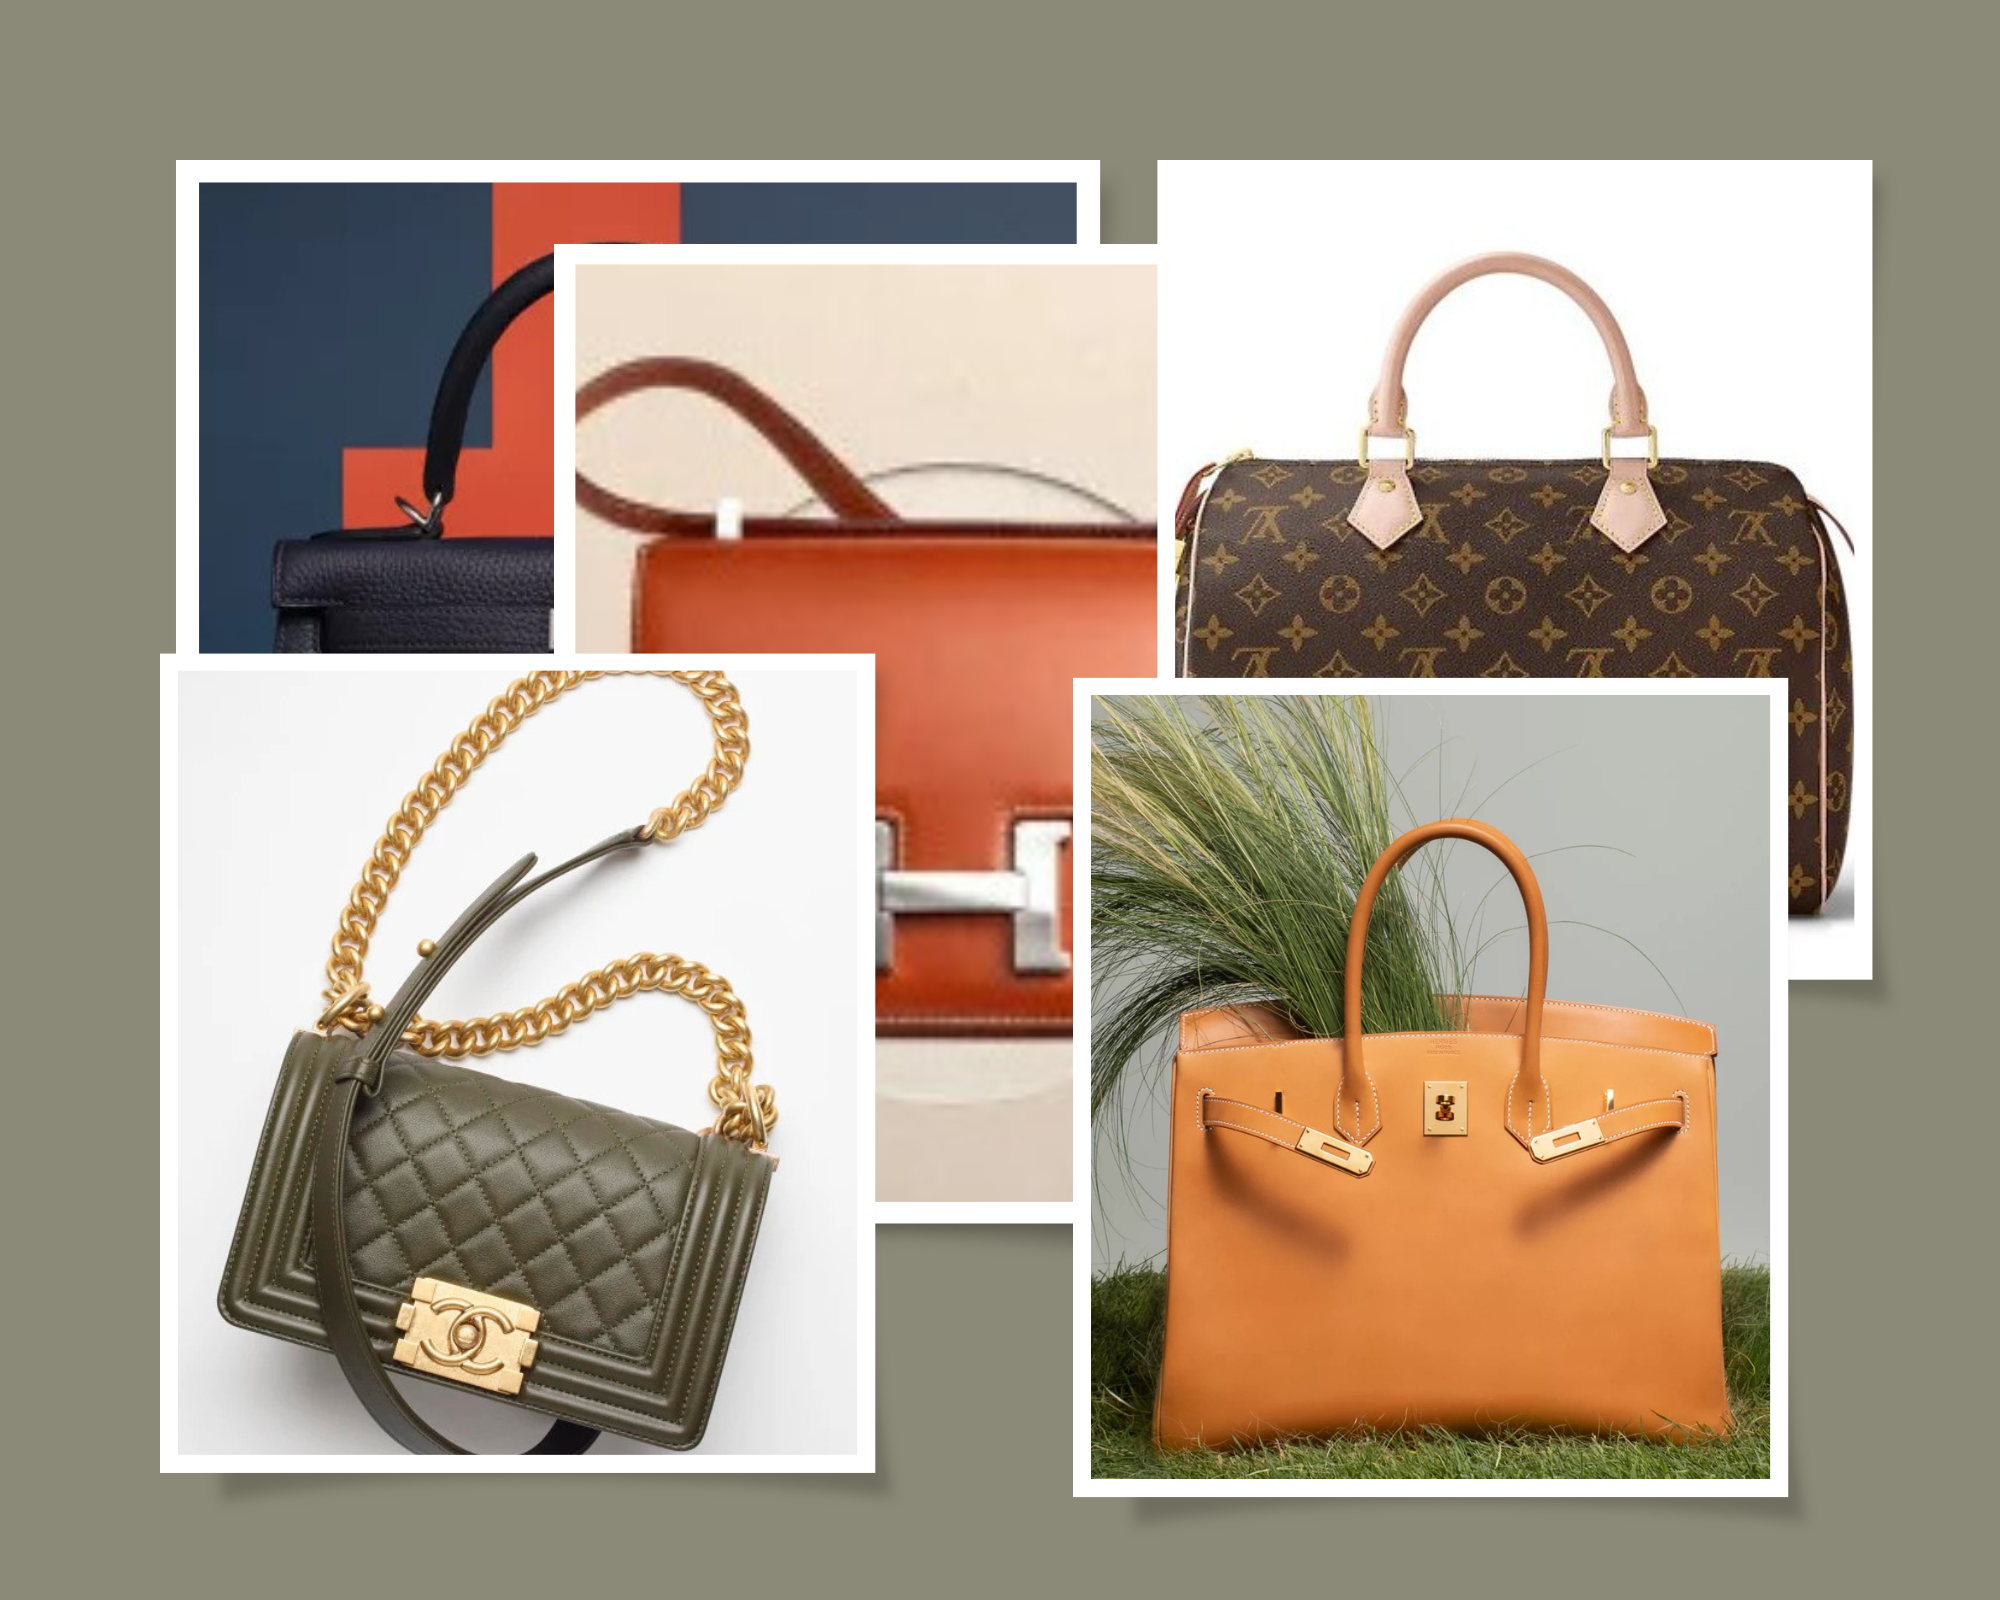 From Hermès and Chanel to Louis Vuitton and Gucci, What Will